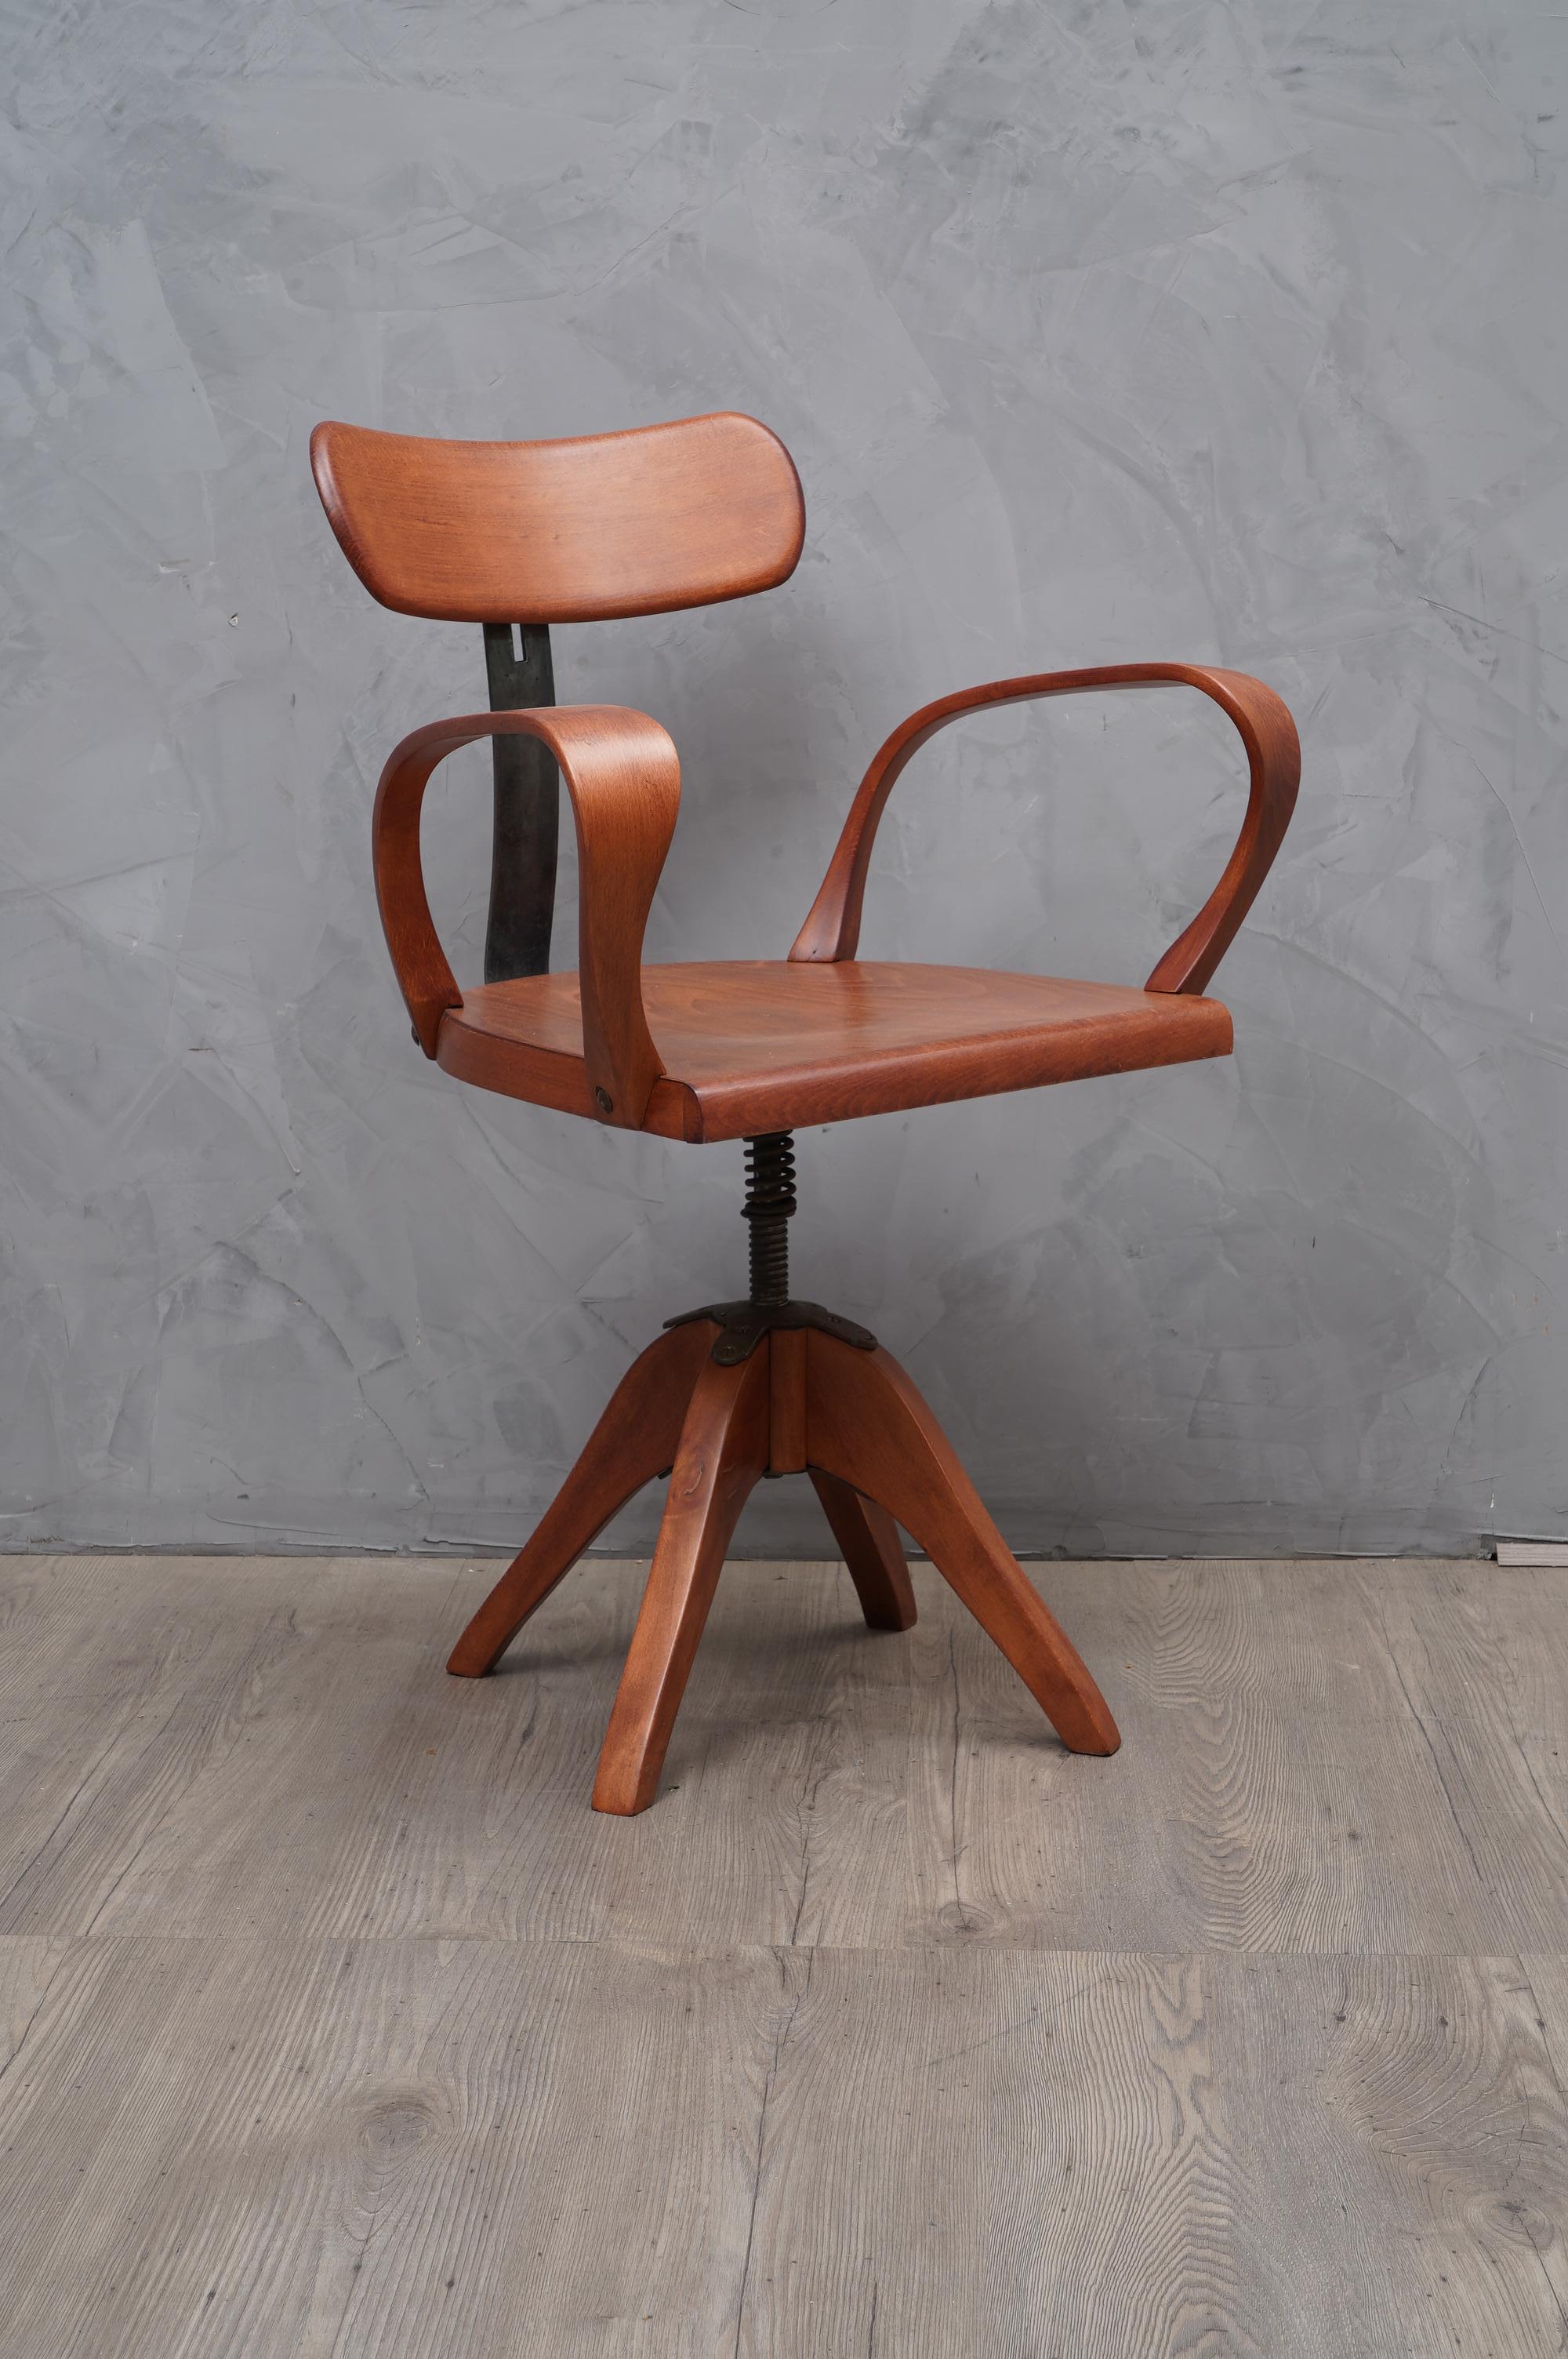 Beautiful desk chair in beechwood, with a very warm and patinated light brown color. Particular its design starting from the armrests to get to the backrest.

The swivel chair has a beechwood structure with iron parts that join the wooden parts.